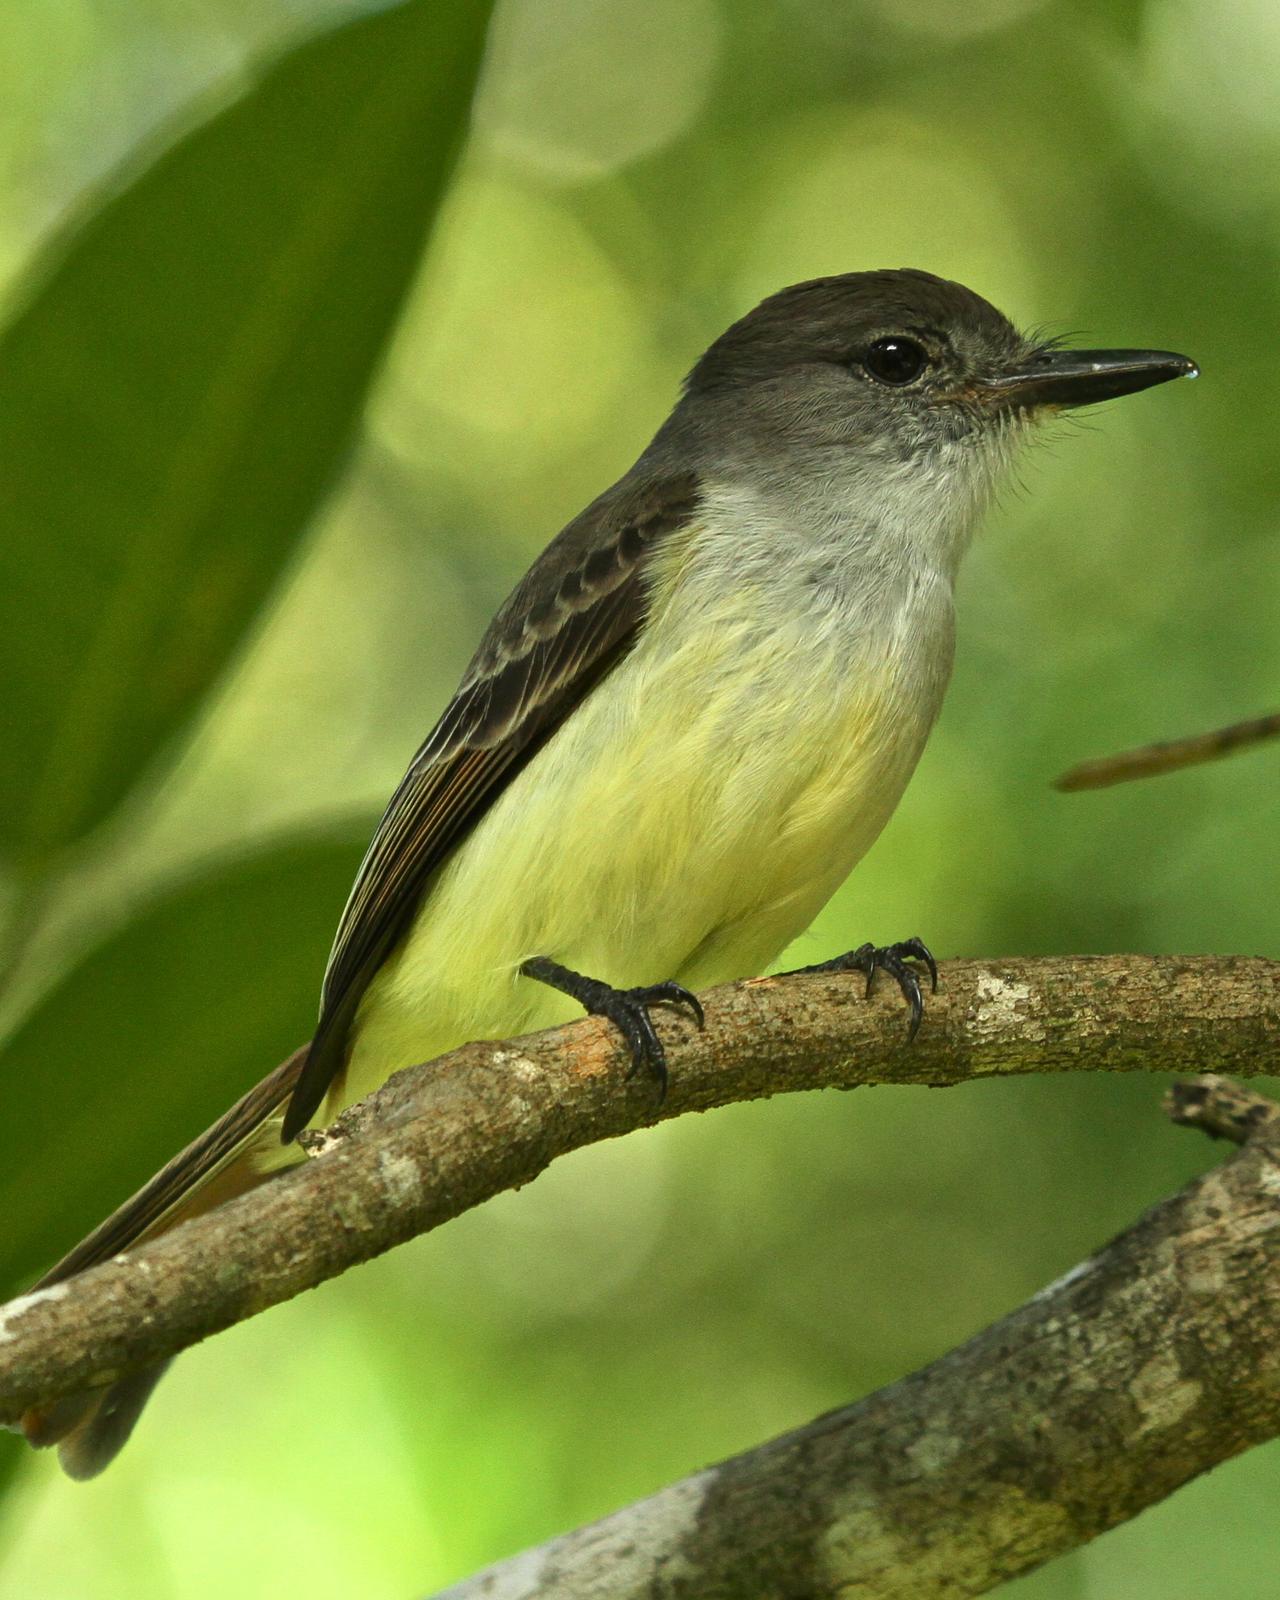 Lesser Antillean Flycatcher Photo by Anthony Levesque